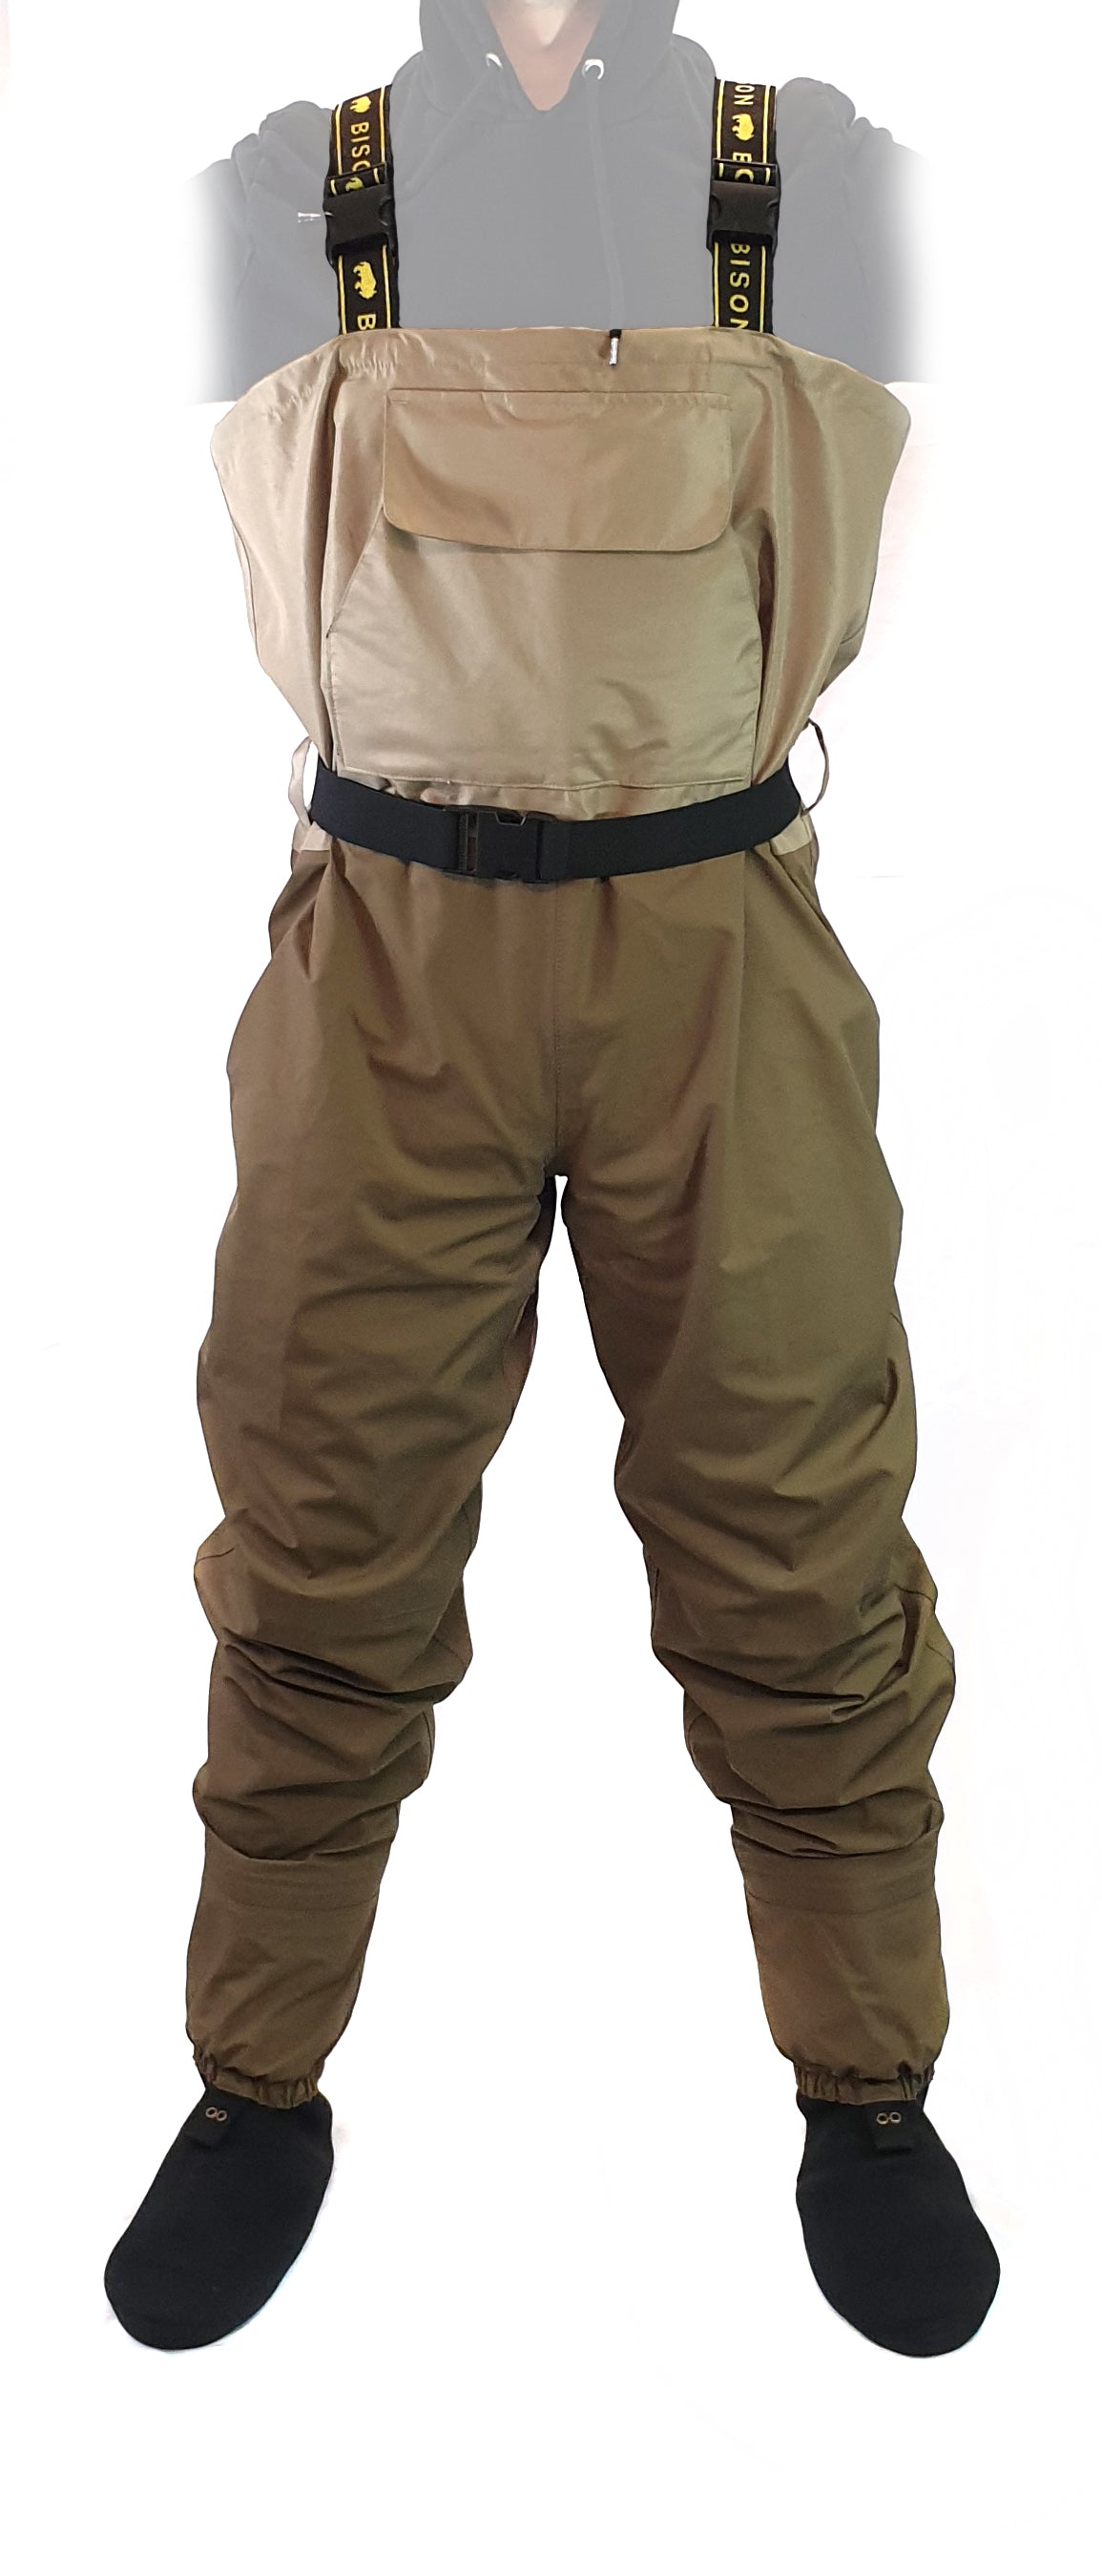 BISON BREATHABLE CHEST WADERS COMPLETE WITH FELT OR RUBBER SOLE MK2 WADING BOOTS